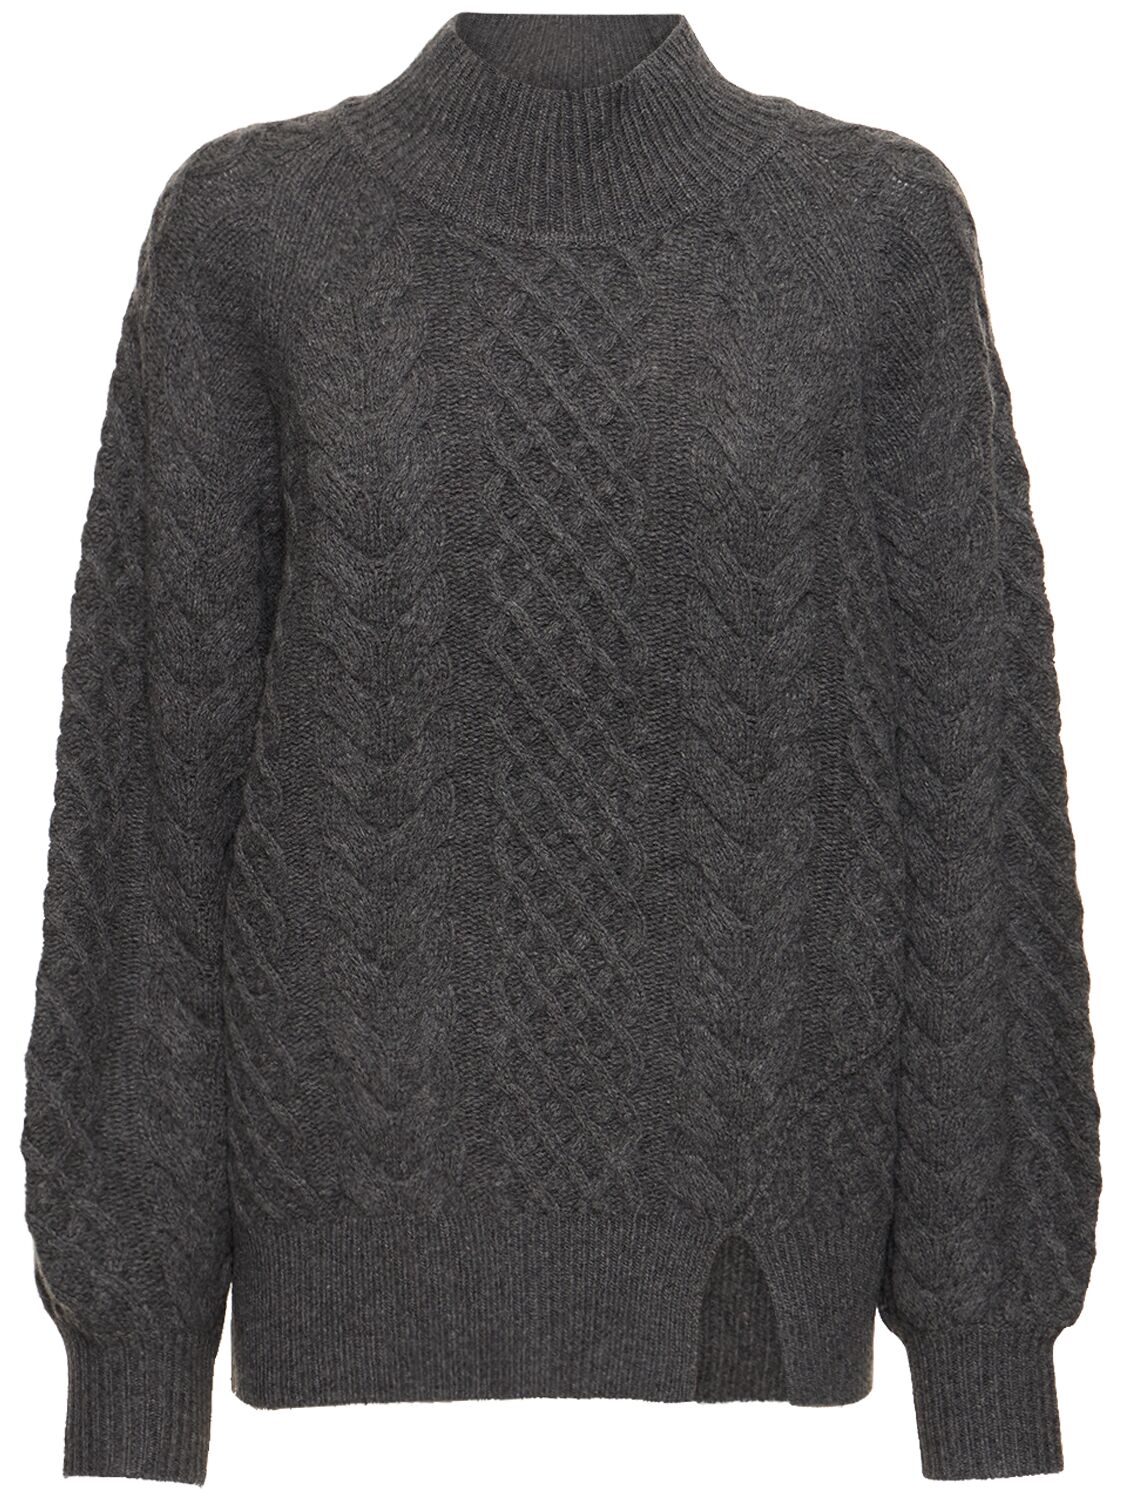 The Garment Como Wool Blend Cable Knit Sweater In Heather Grey